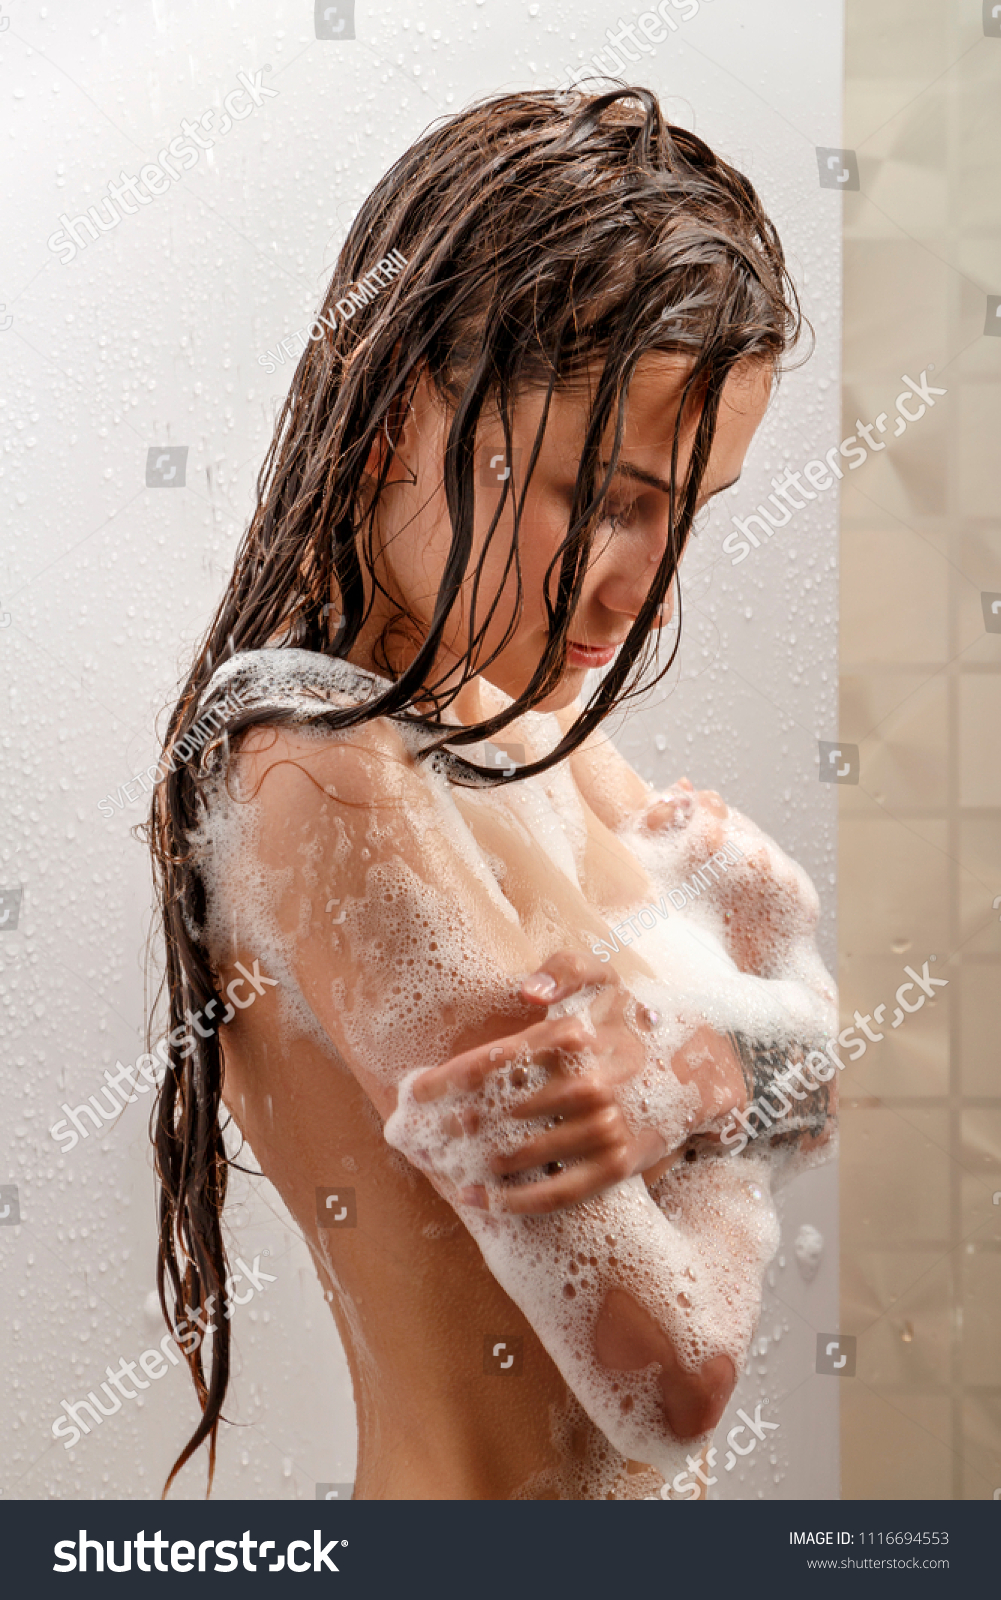 suction dildo in shower sex photo